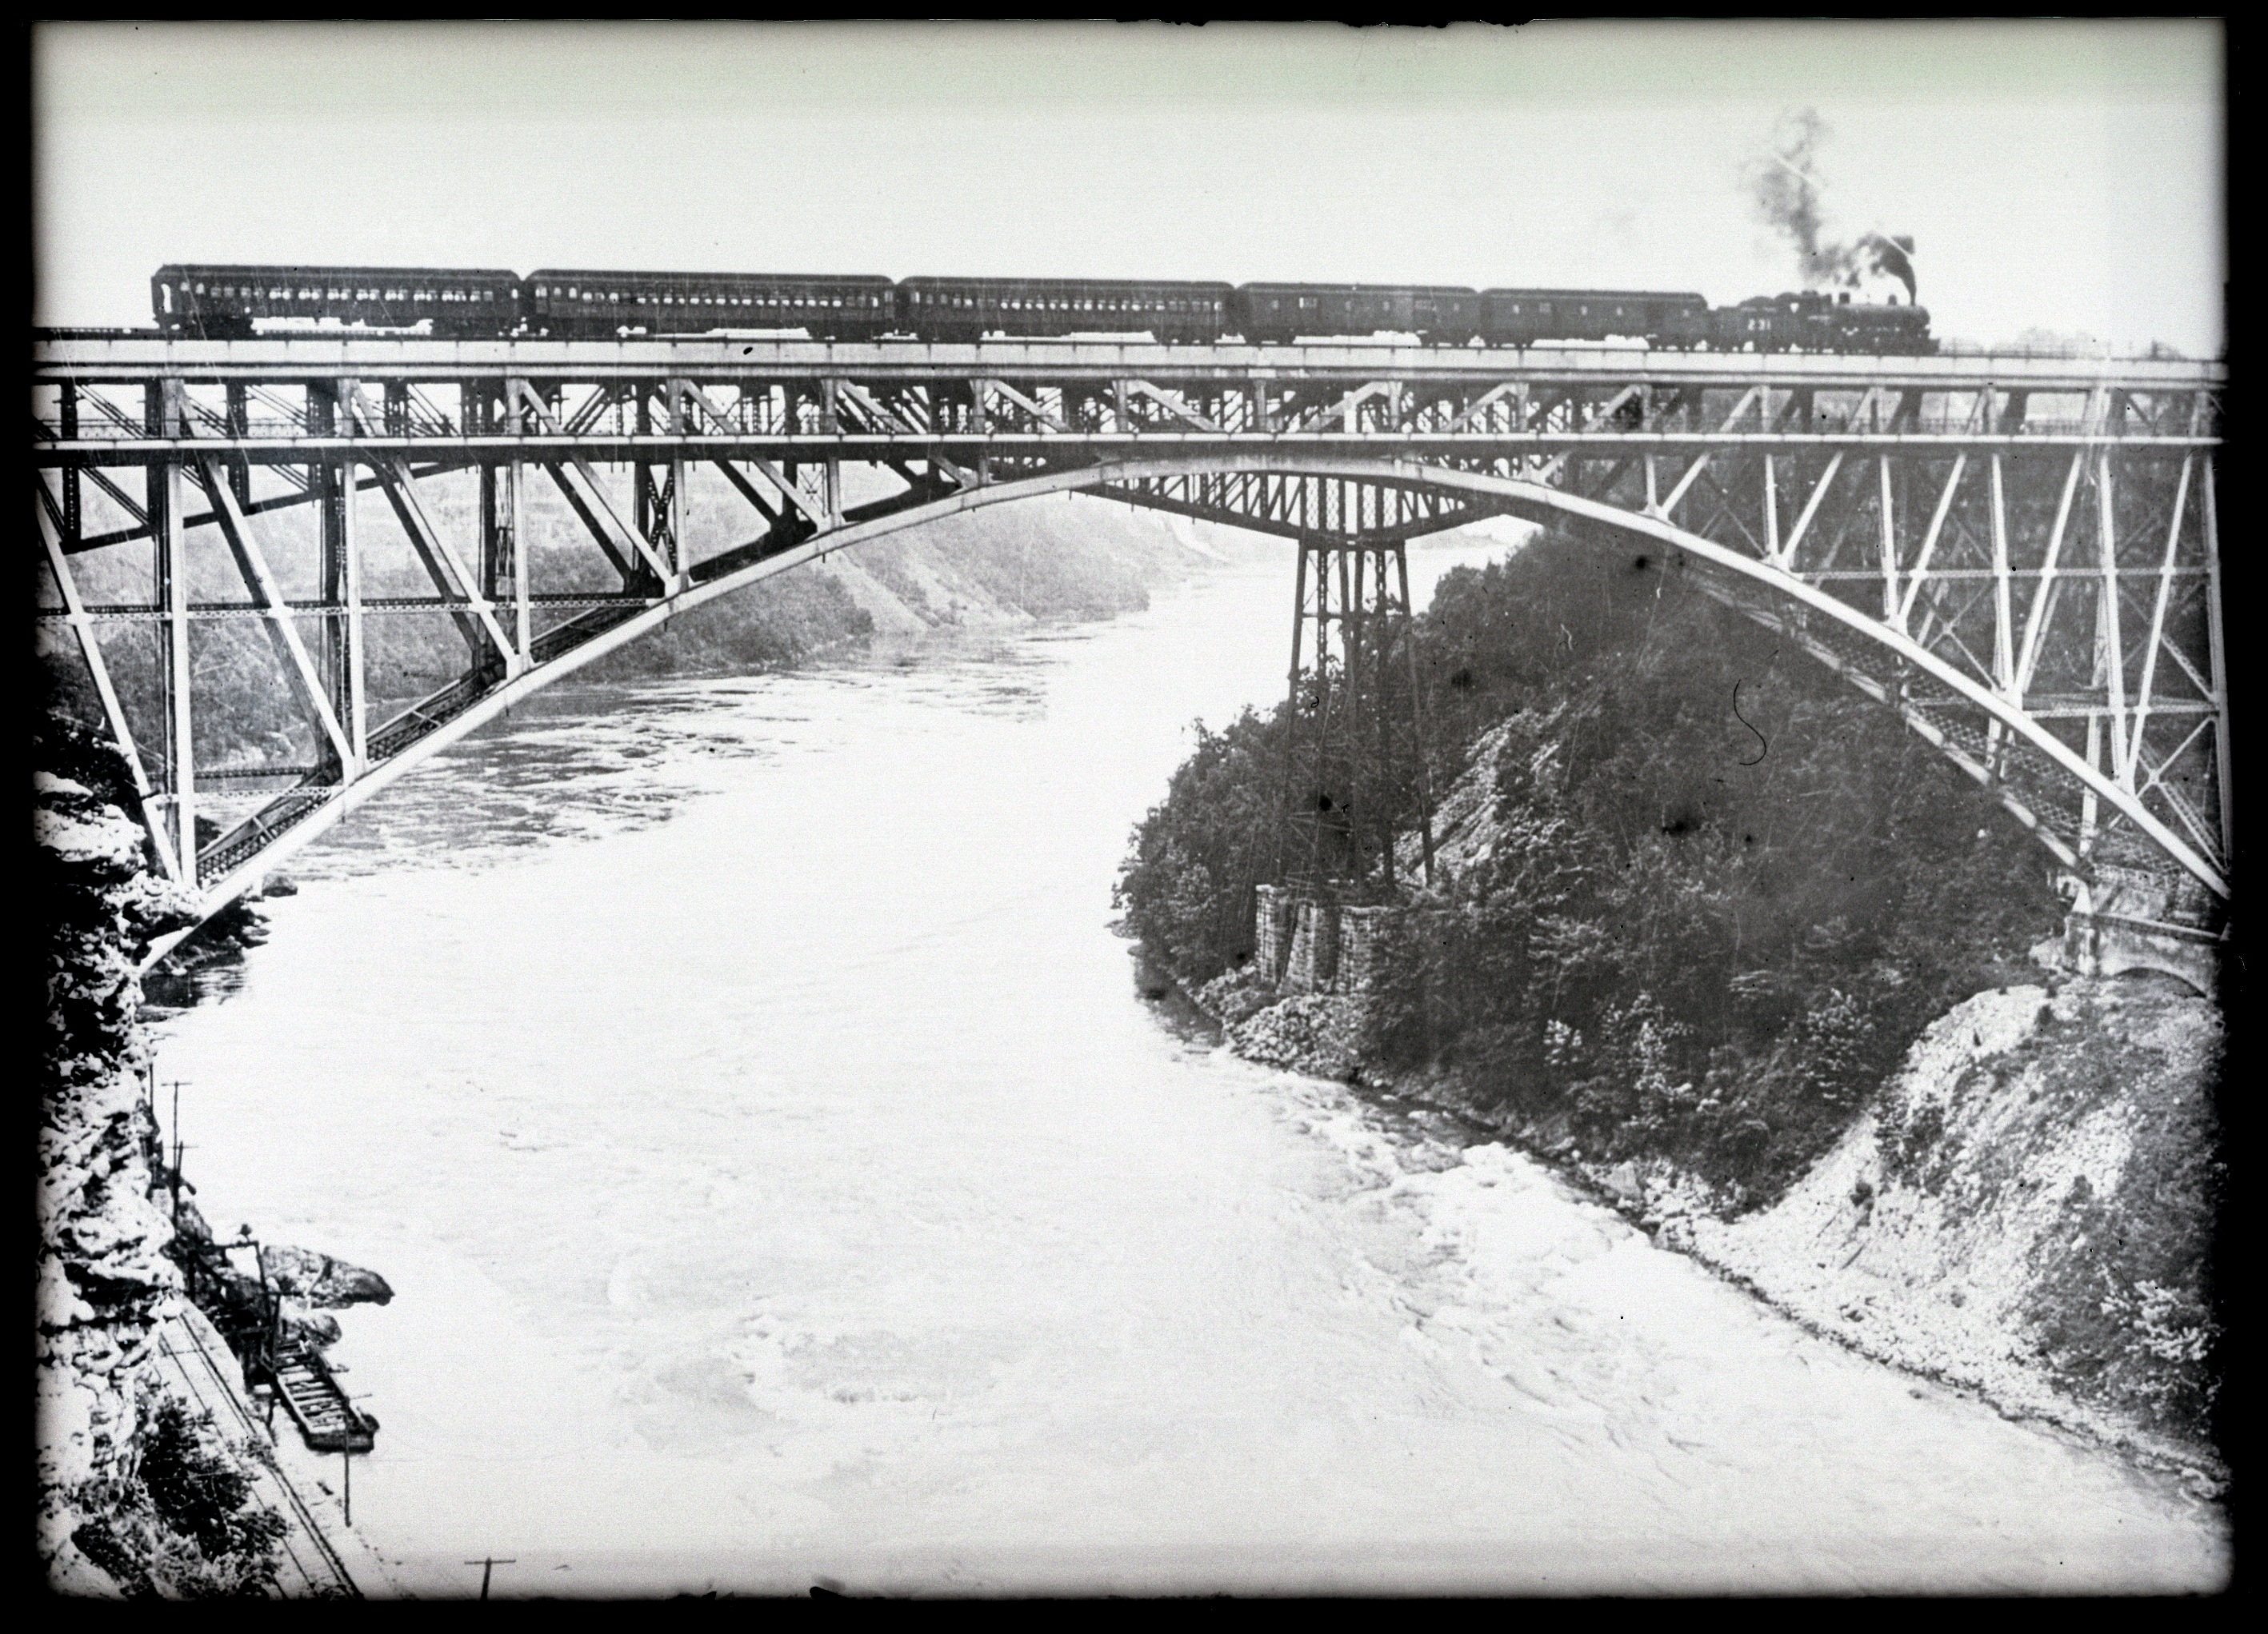 Black and white image of a train traveling on a steel arch bridge over the Niagara River rapids. 